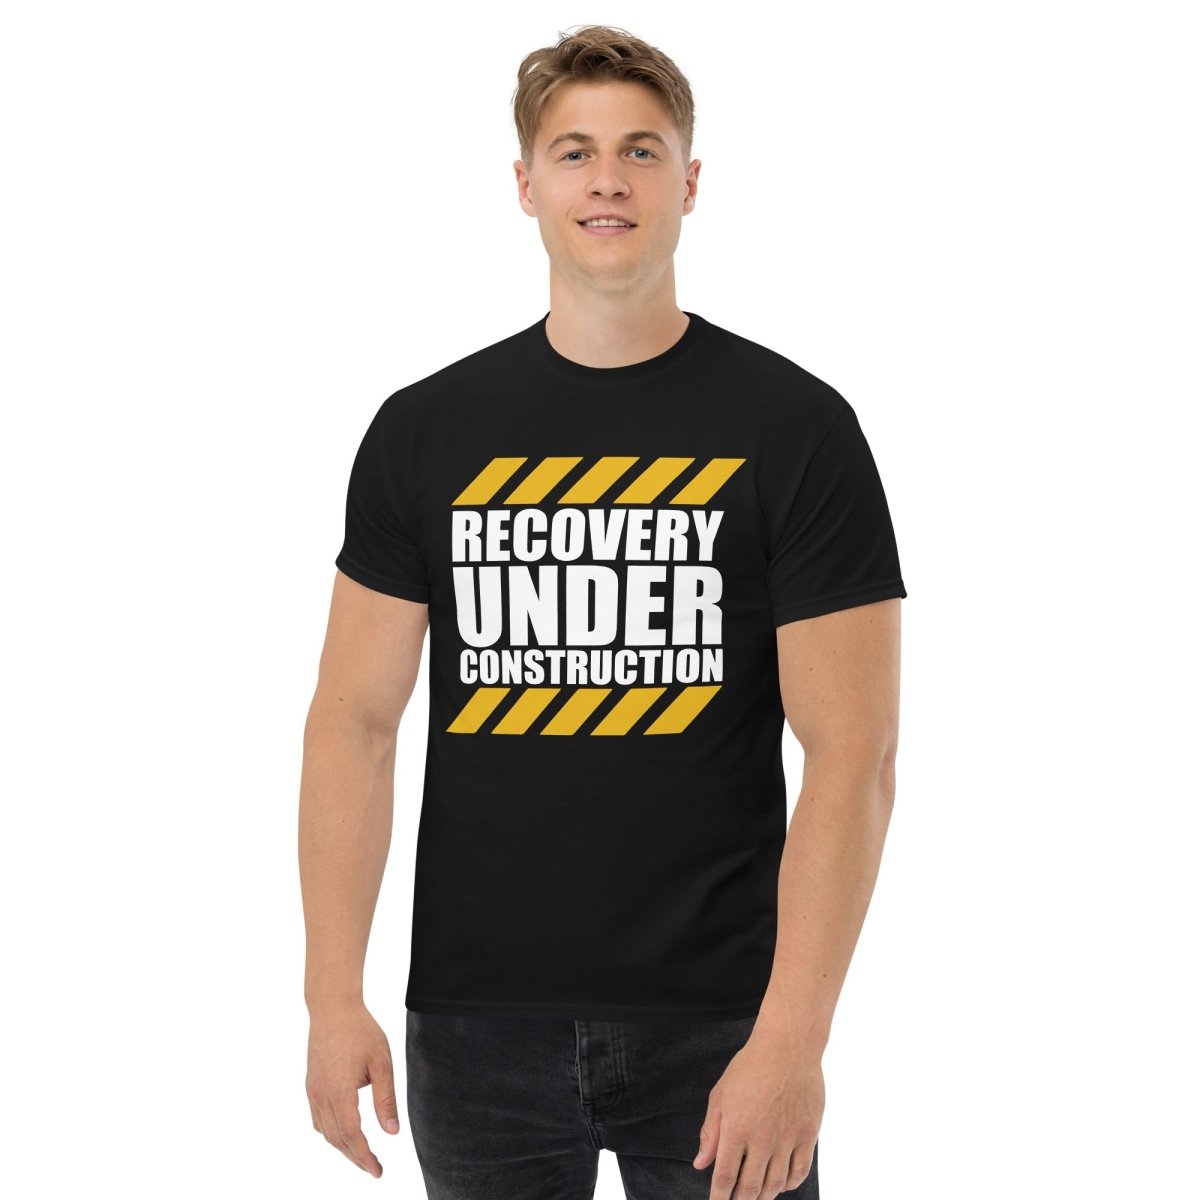 Recovery Under Construction - Men's Classic Tee for Healing Progress - Clean & Sober